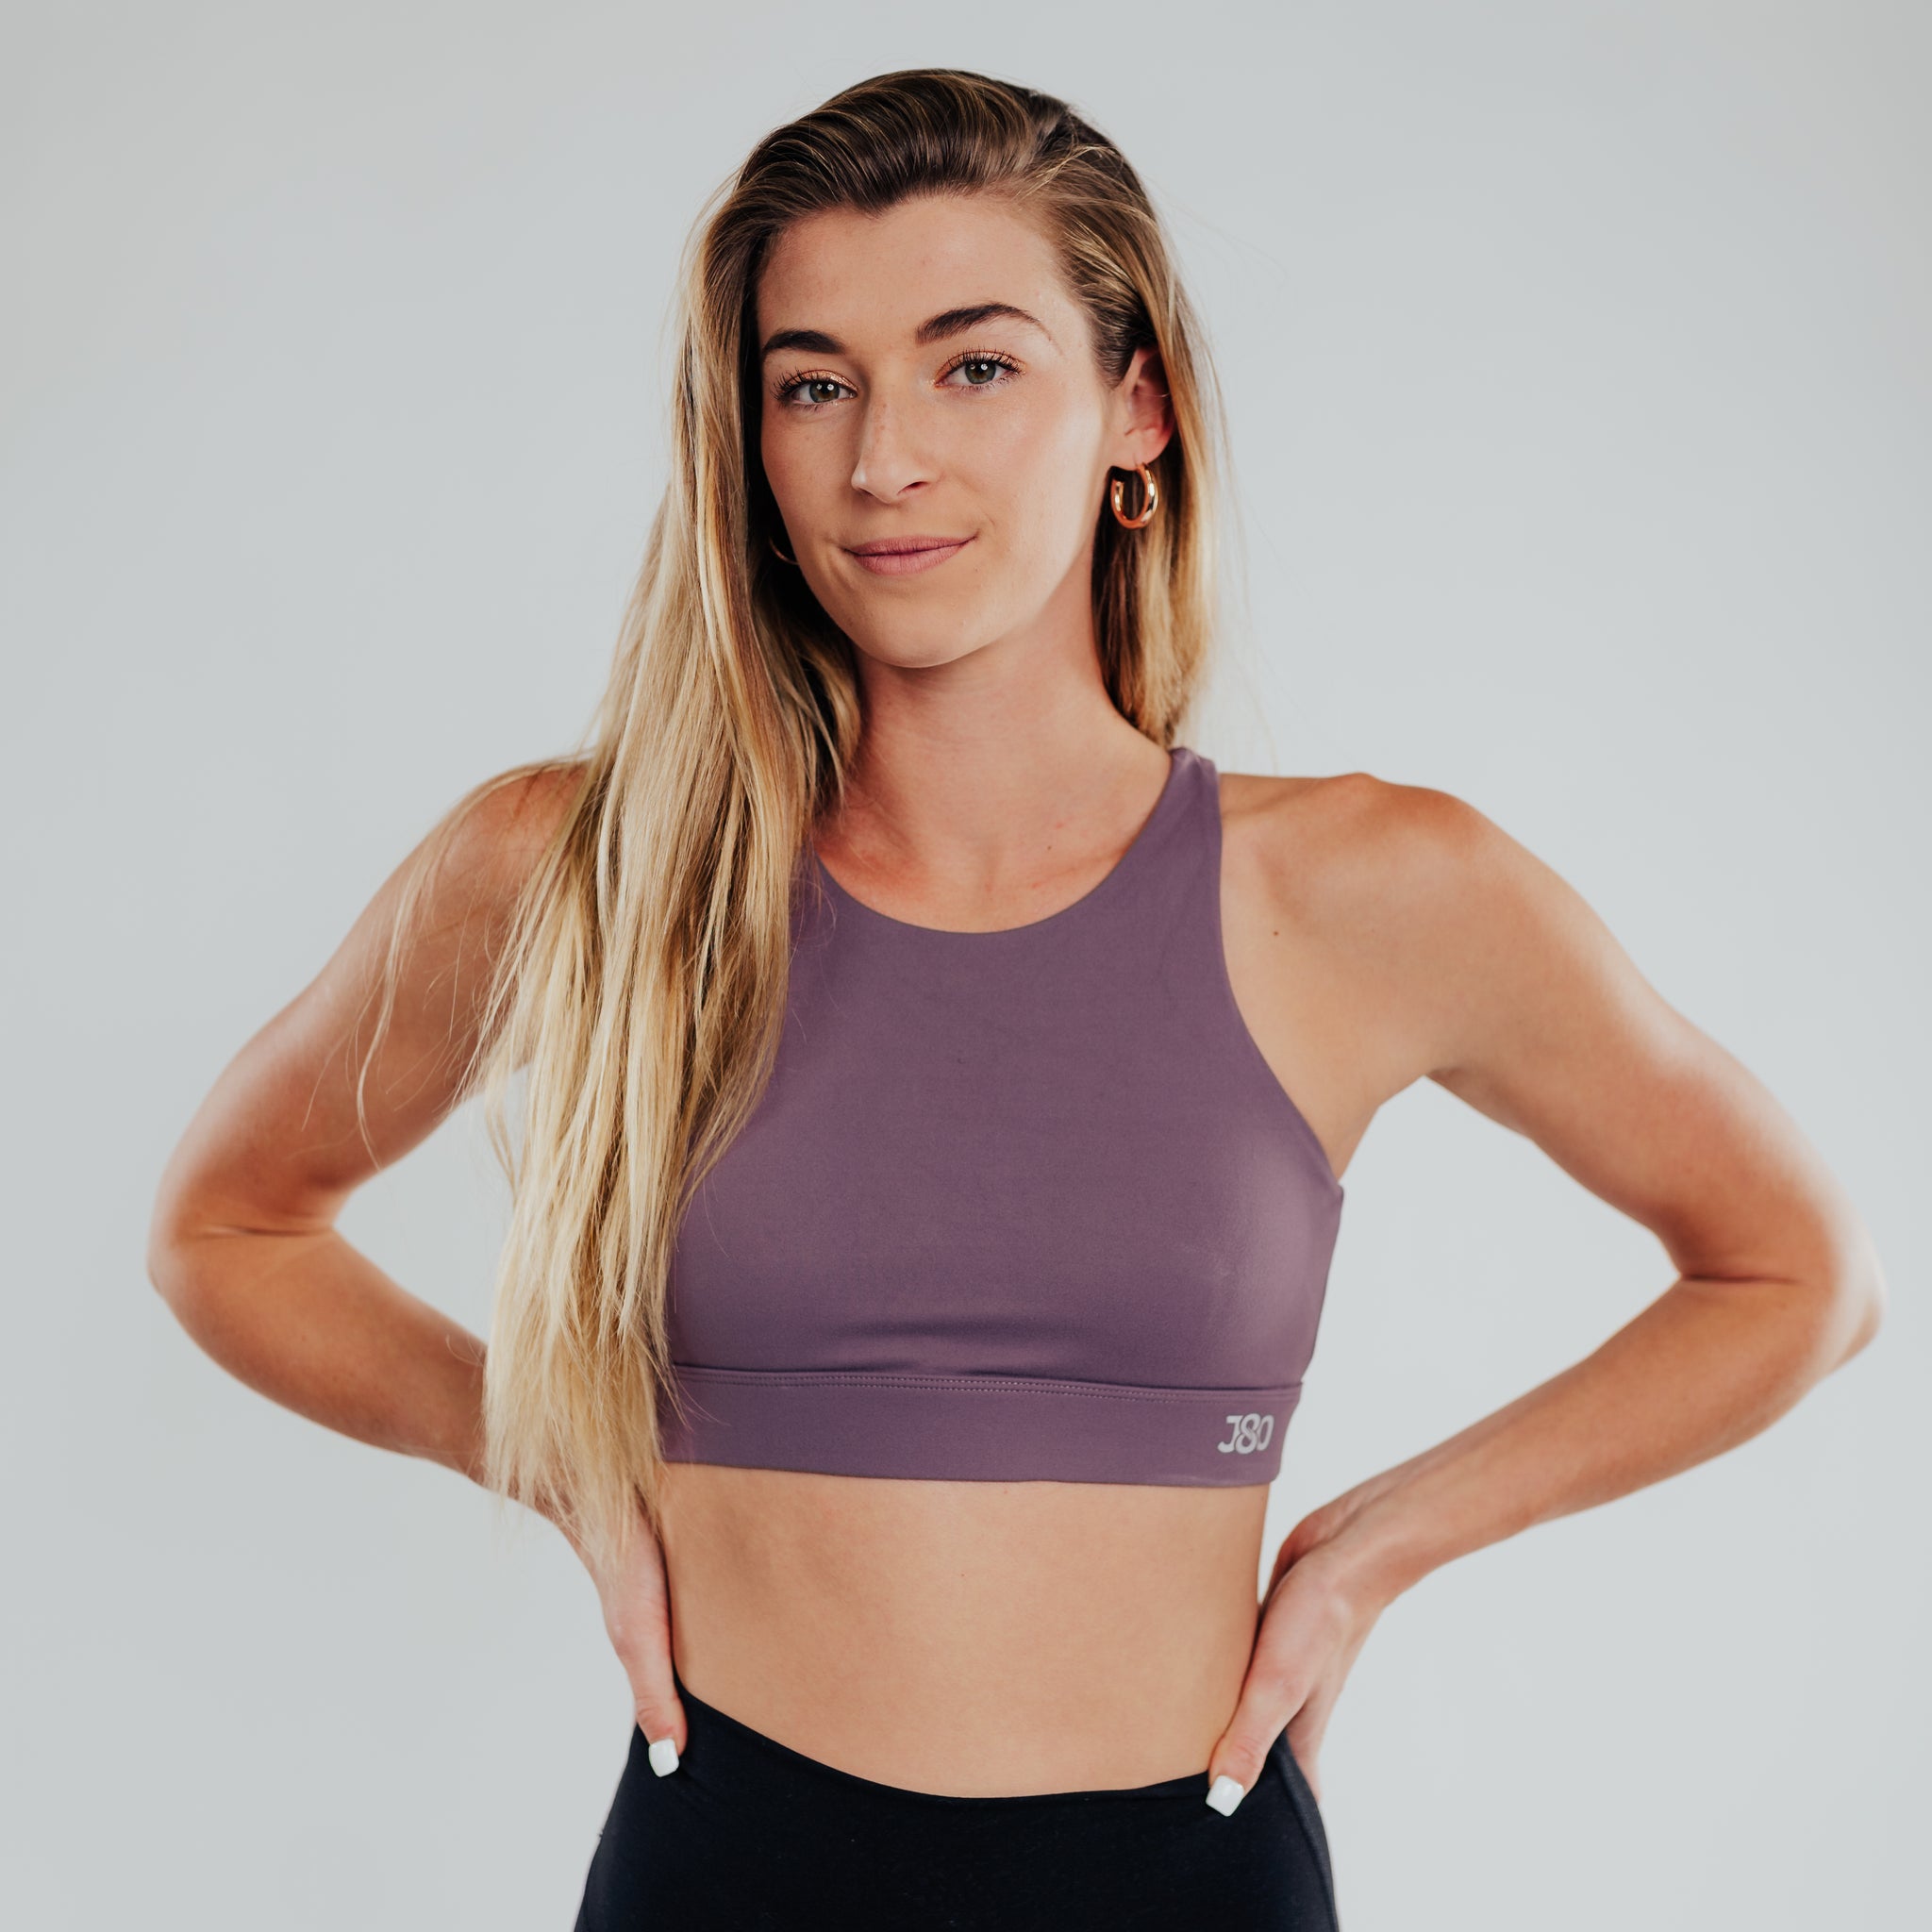 Women's Sports Bra Seamless Full Support Coverage Wireless Sport Bras for  Yoga Gym Workout Fitness S-6XL – the best products in the Joom Geek online  store